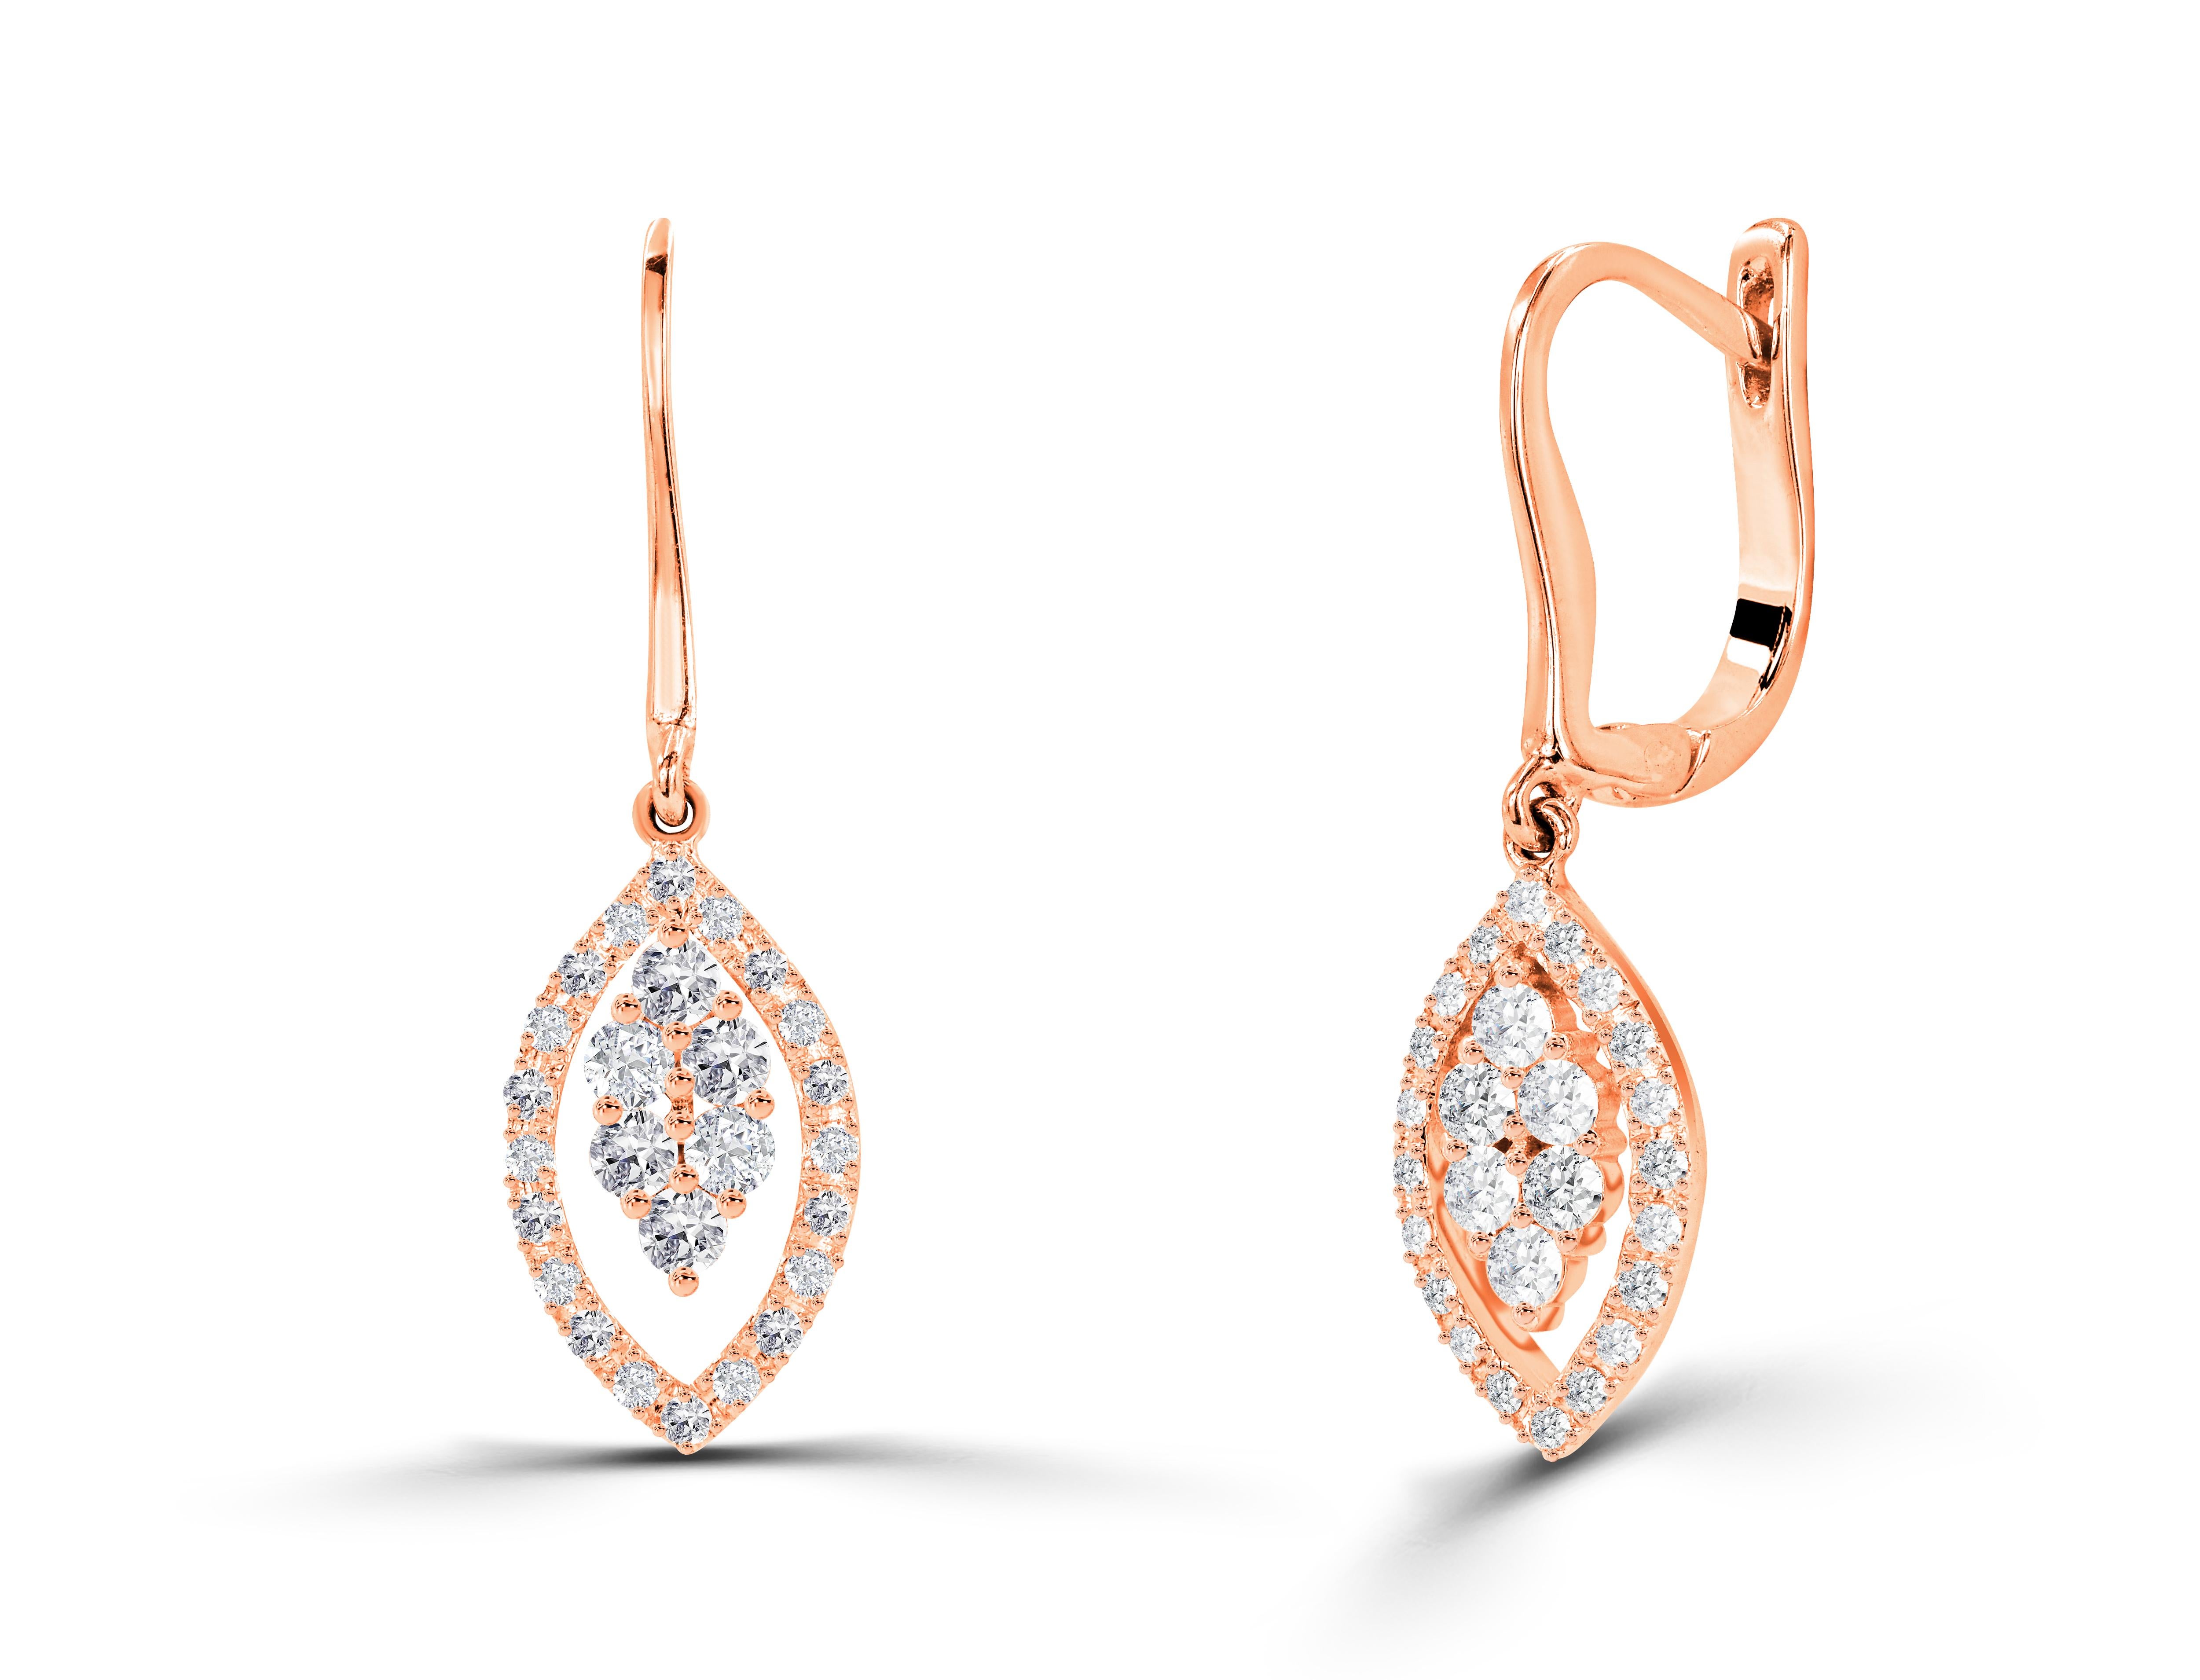 0.50 Ct Diamond Marquise shaped Drop Earrings in 18K Gold, Round Brilliant cut diamond earrings, Natural Diamond Earrings, Lever-Back earrings, Heavy End Earrings.

Jewels By Tarry presents to you a beautiful Earring collection with natural diamonds